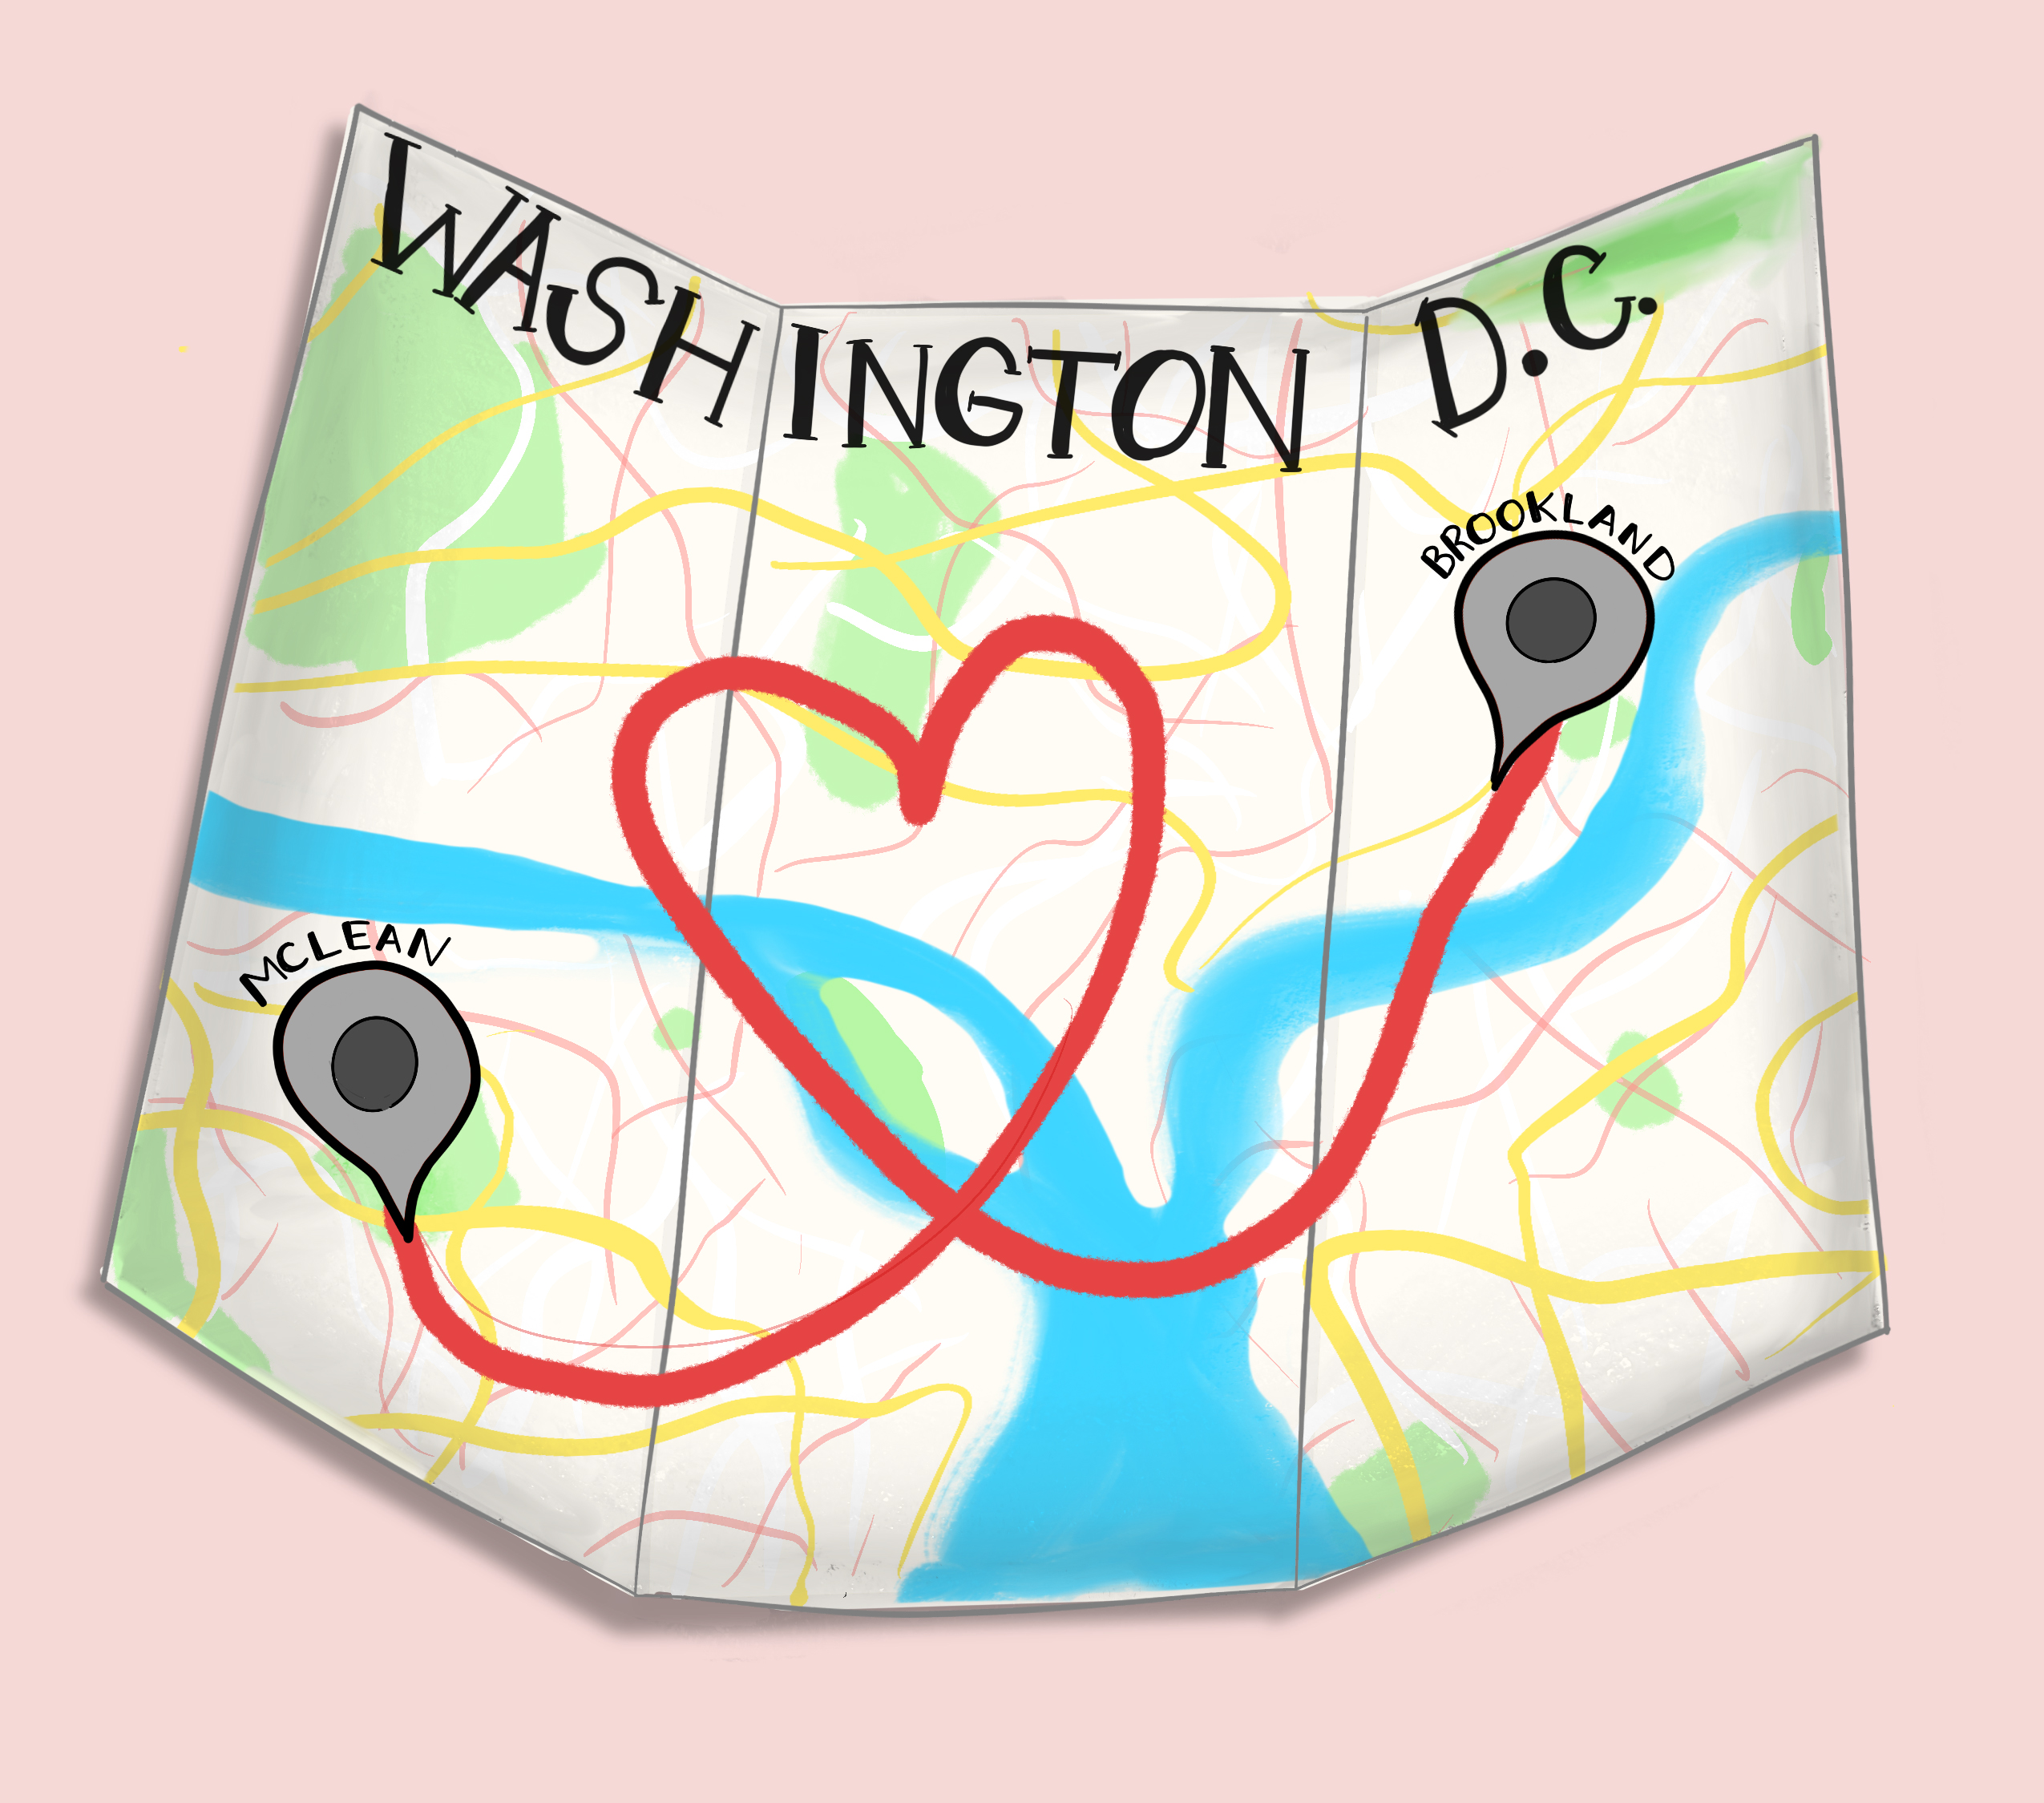 A Single's Guide to Dating in Washington, DC